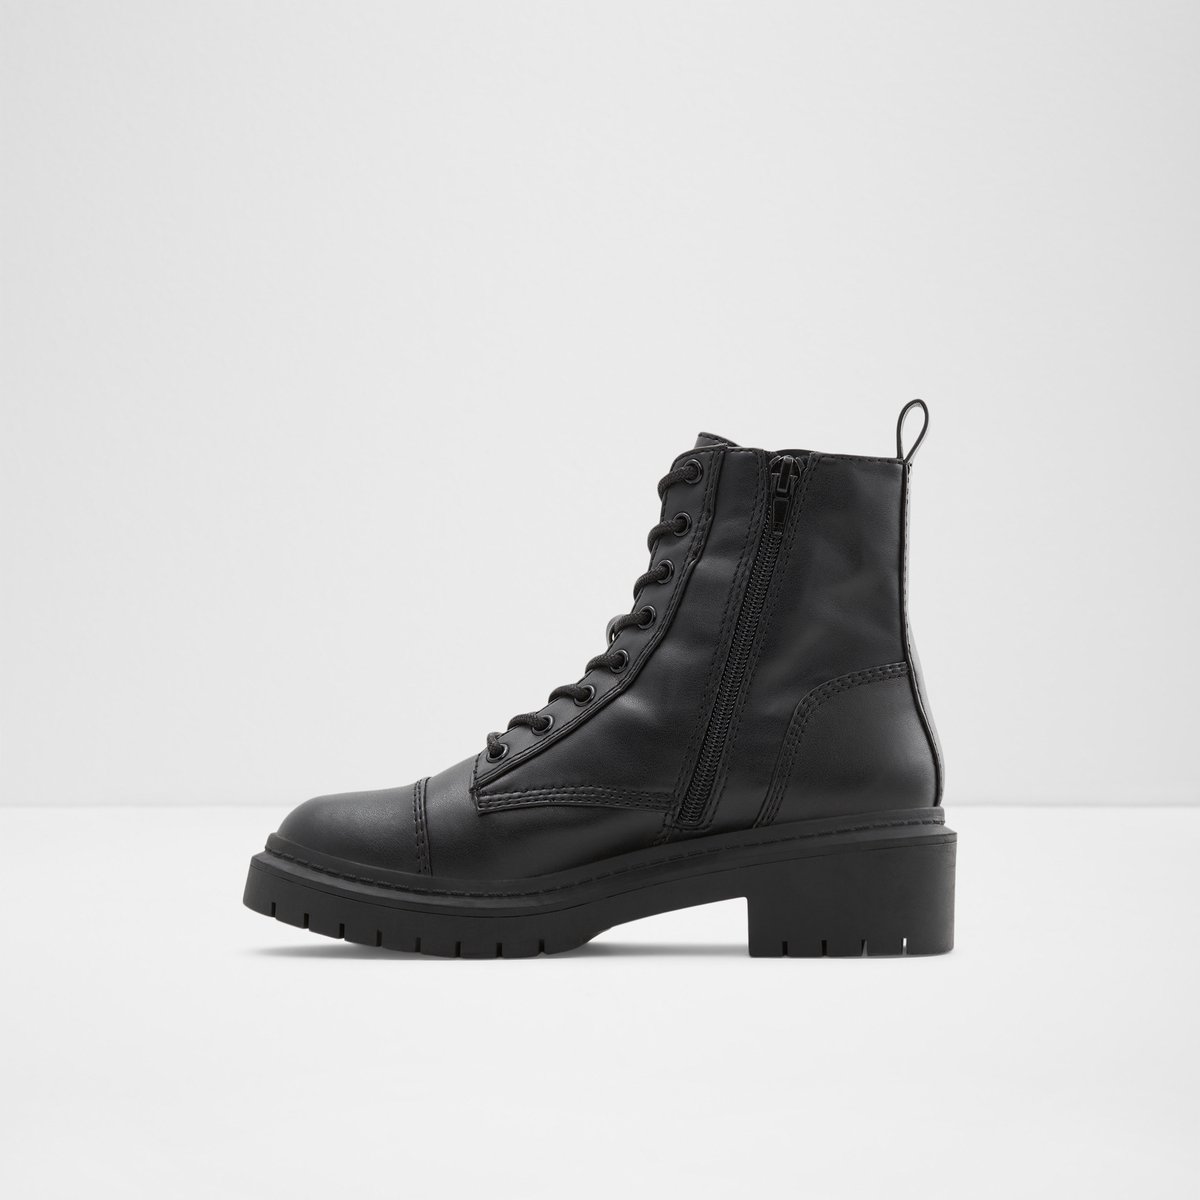 Goer Black Synthetic Smooth Women's Winter boots | ALDO Canada